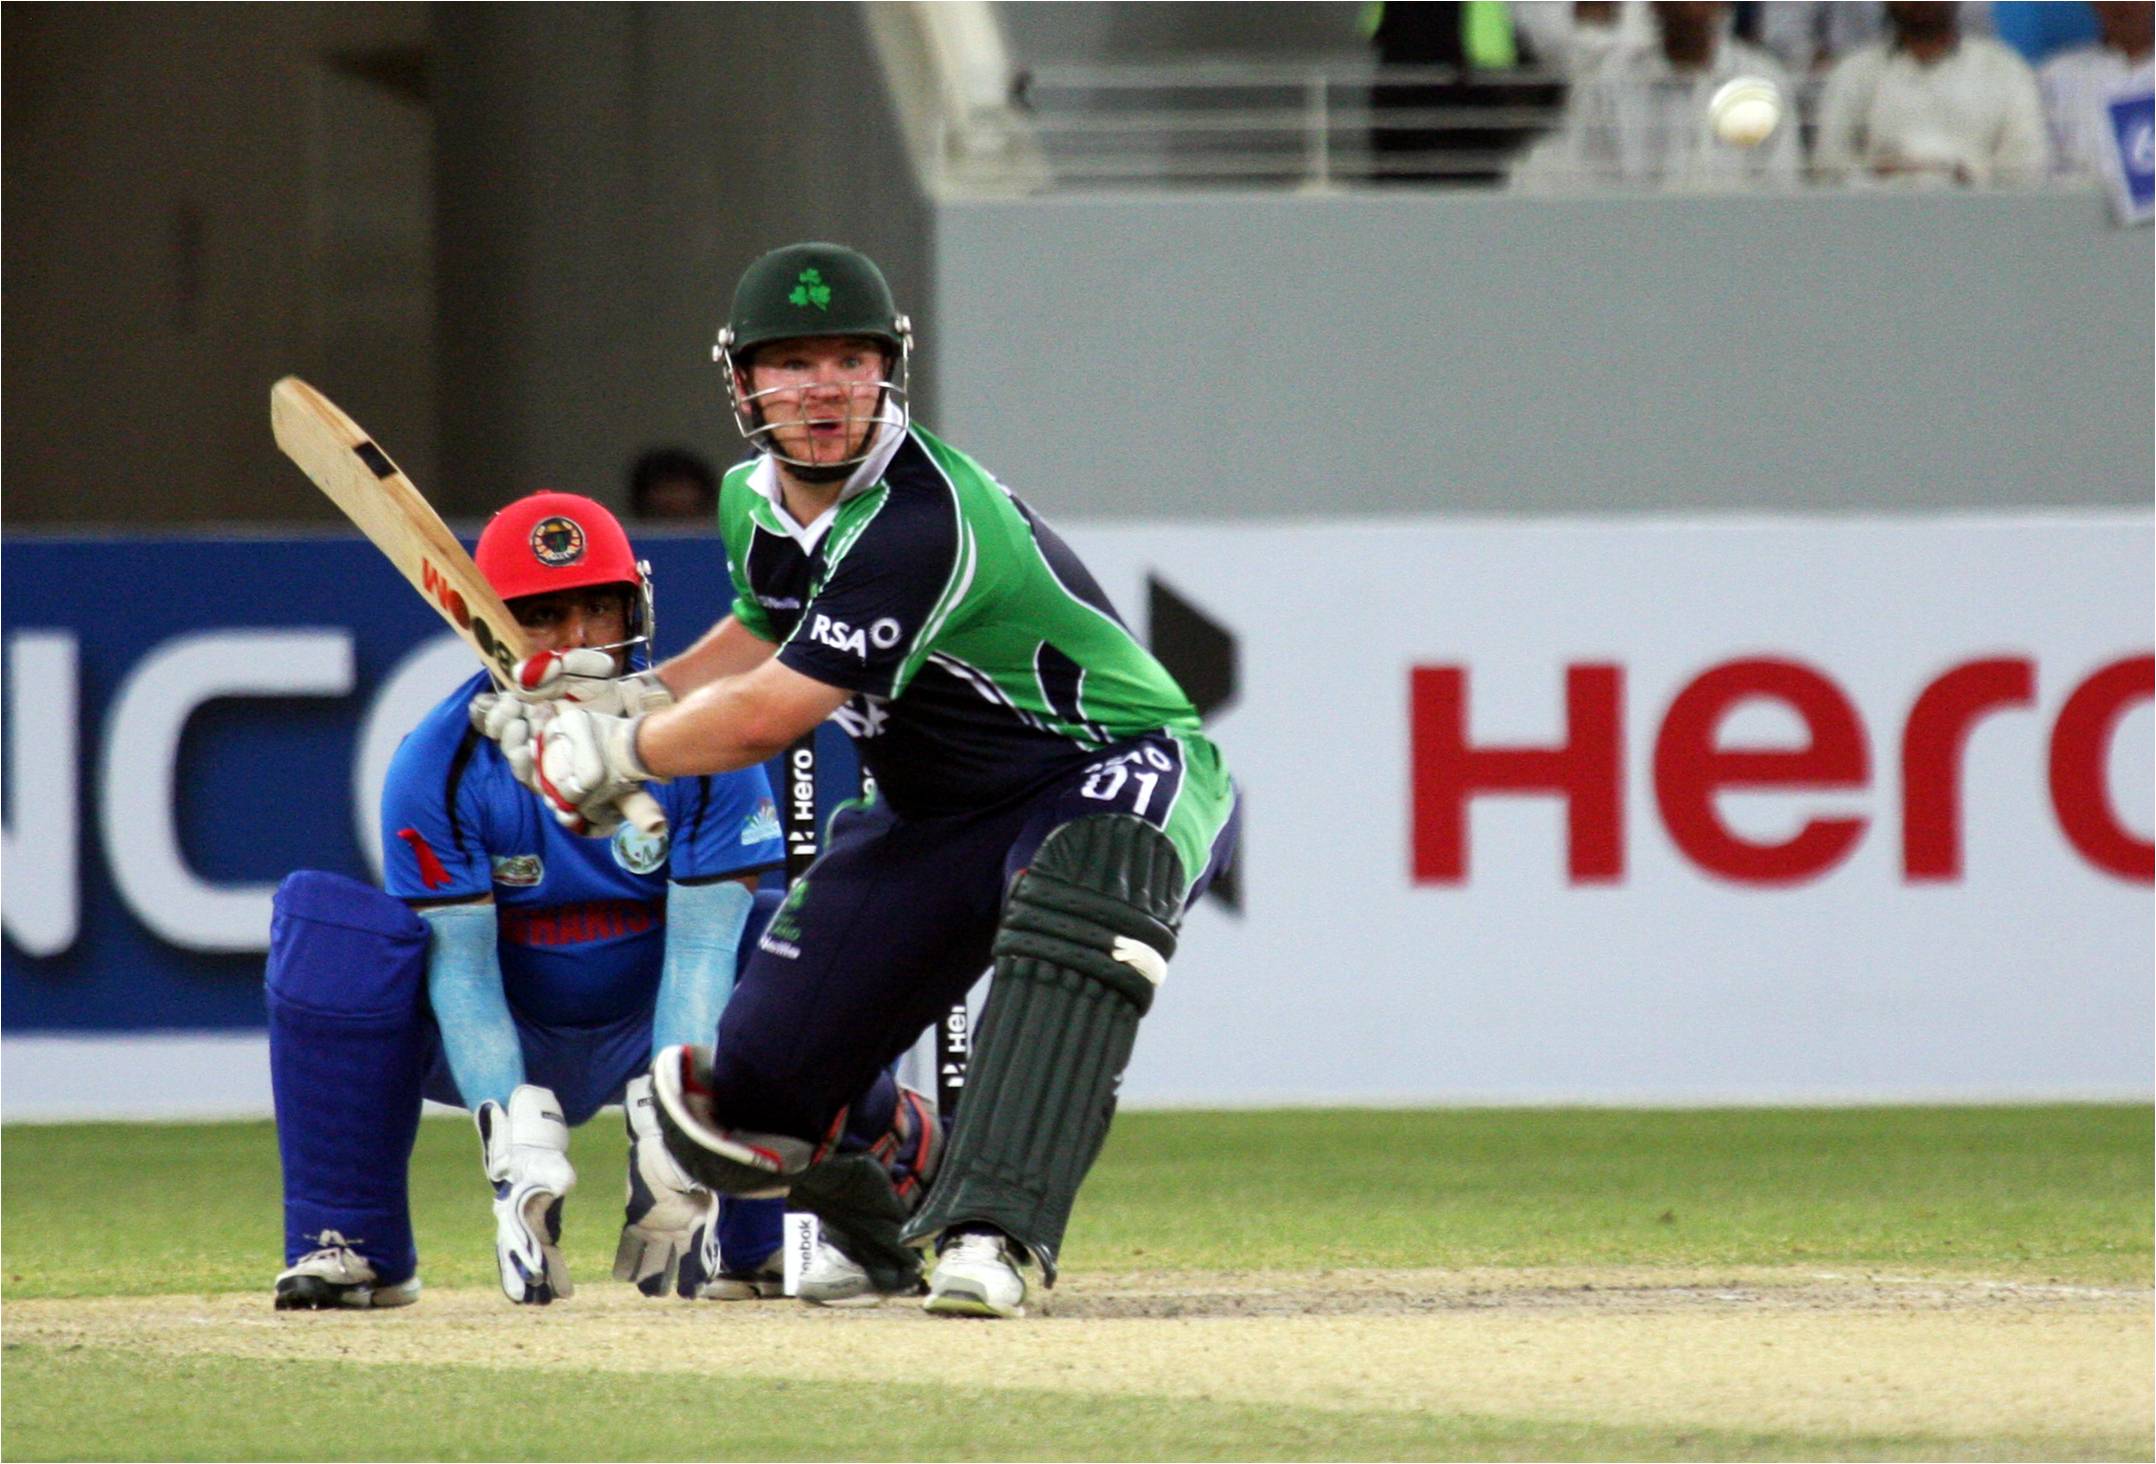 Ireland beat Afghanistan by 5 wickets in the Final of the ICC Twenty20 Qualifier